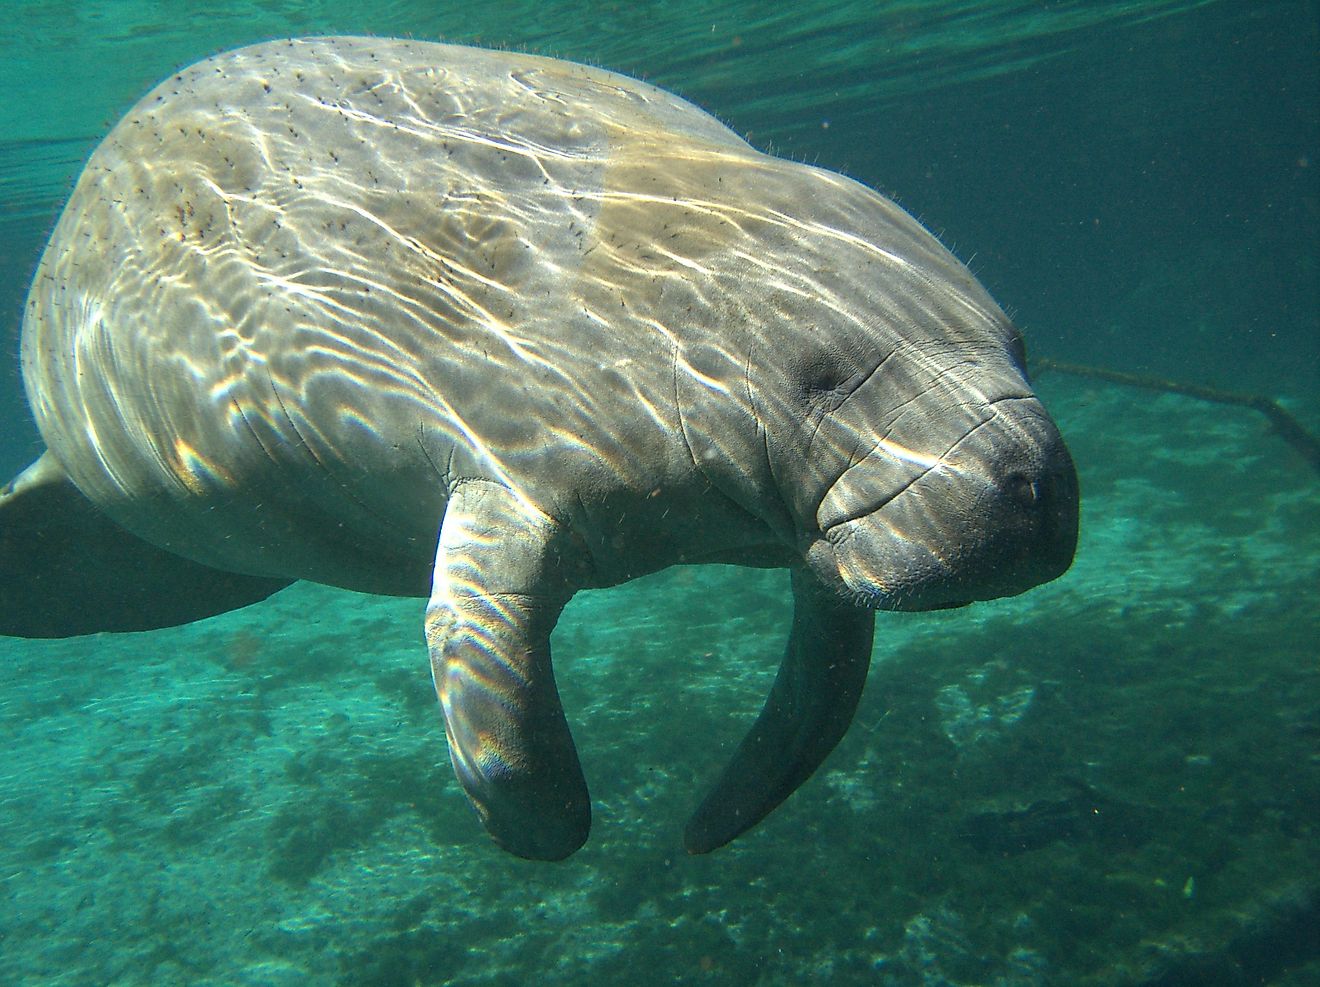 In case you thought manatees are an endangered species, this answer might come as a surprise: No, they are not!